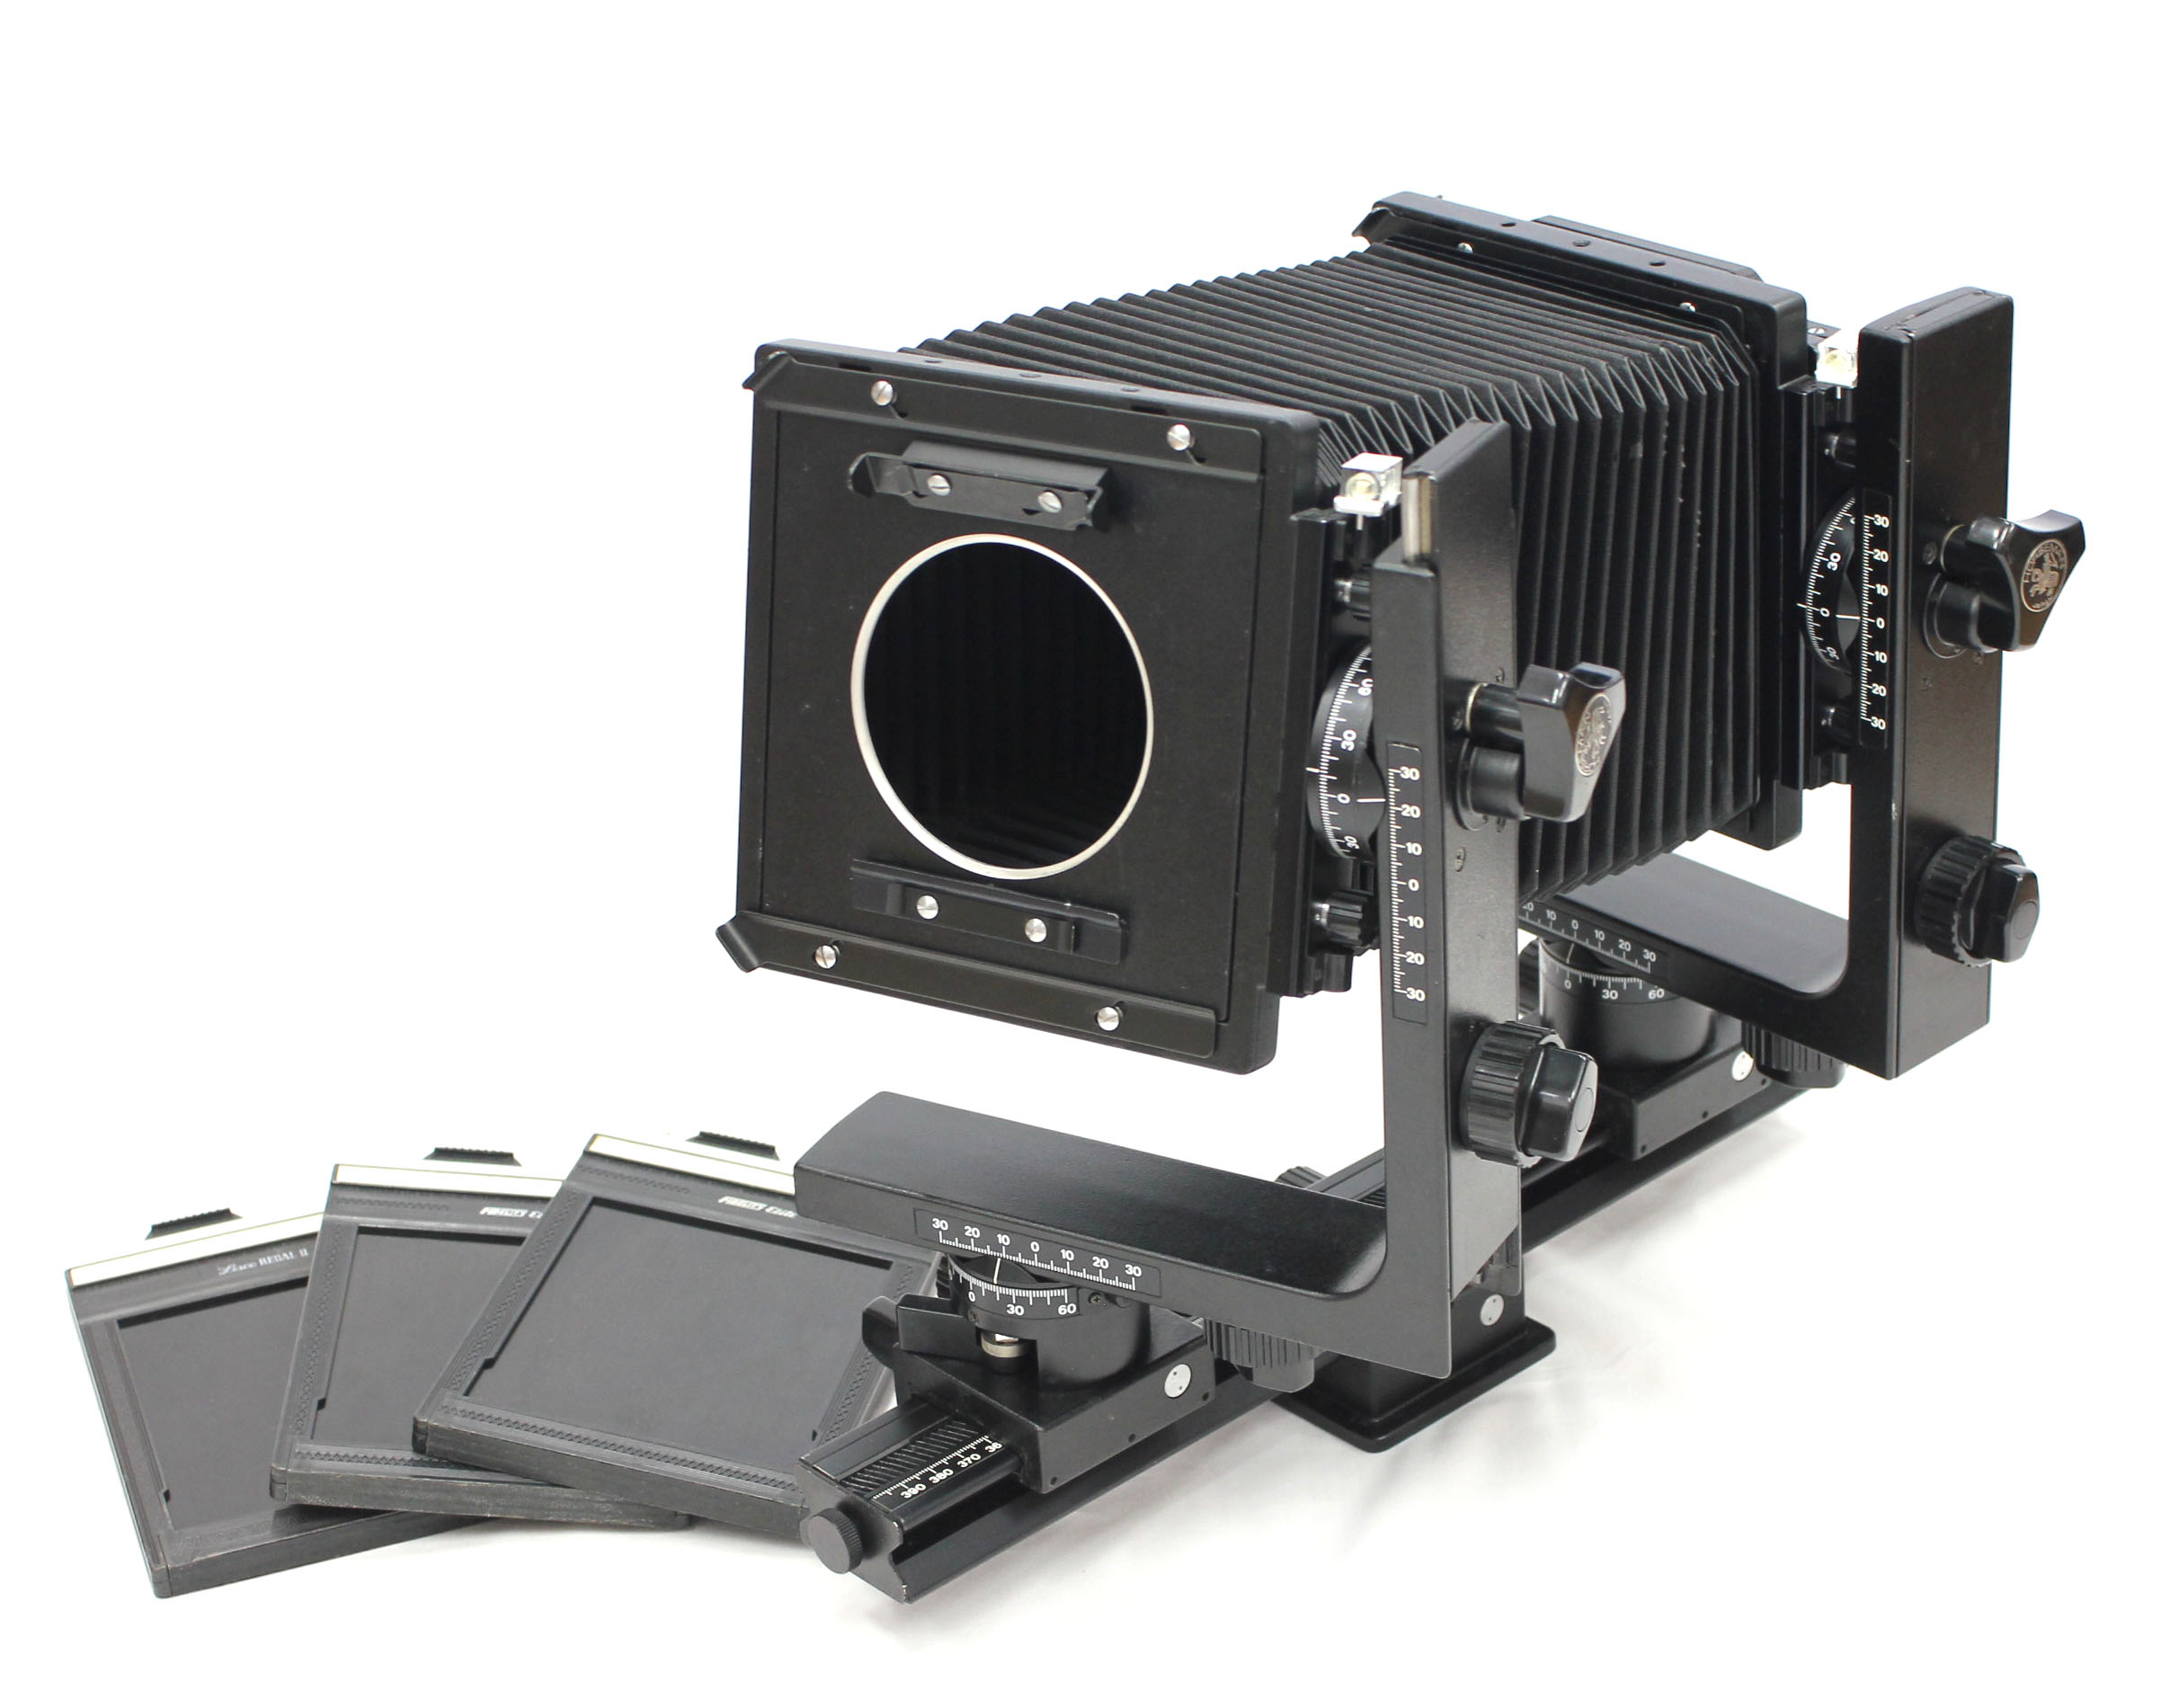 Horseman L45 4x5 Large Format View Type Monorail Camera with 3 Cut Film Holders from Japan